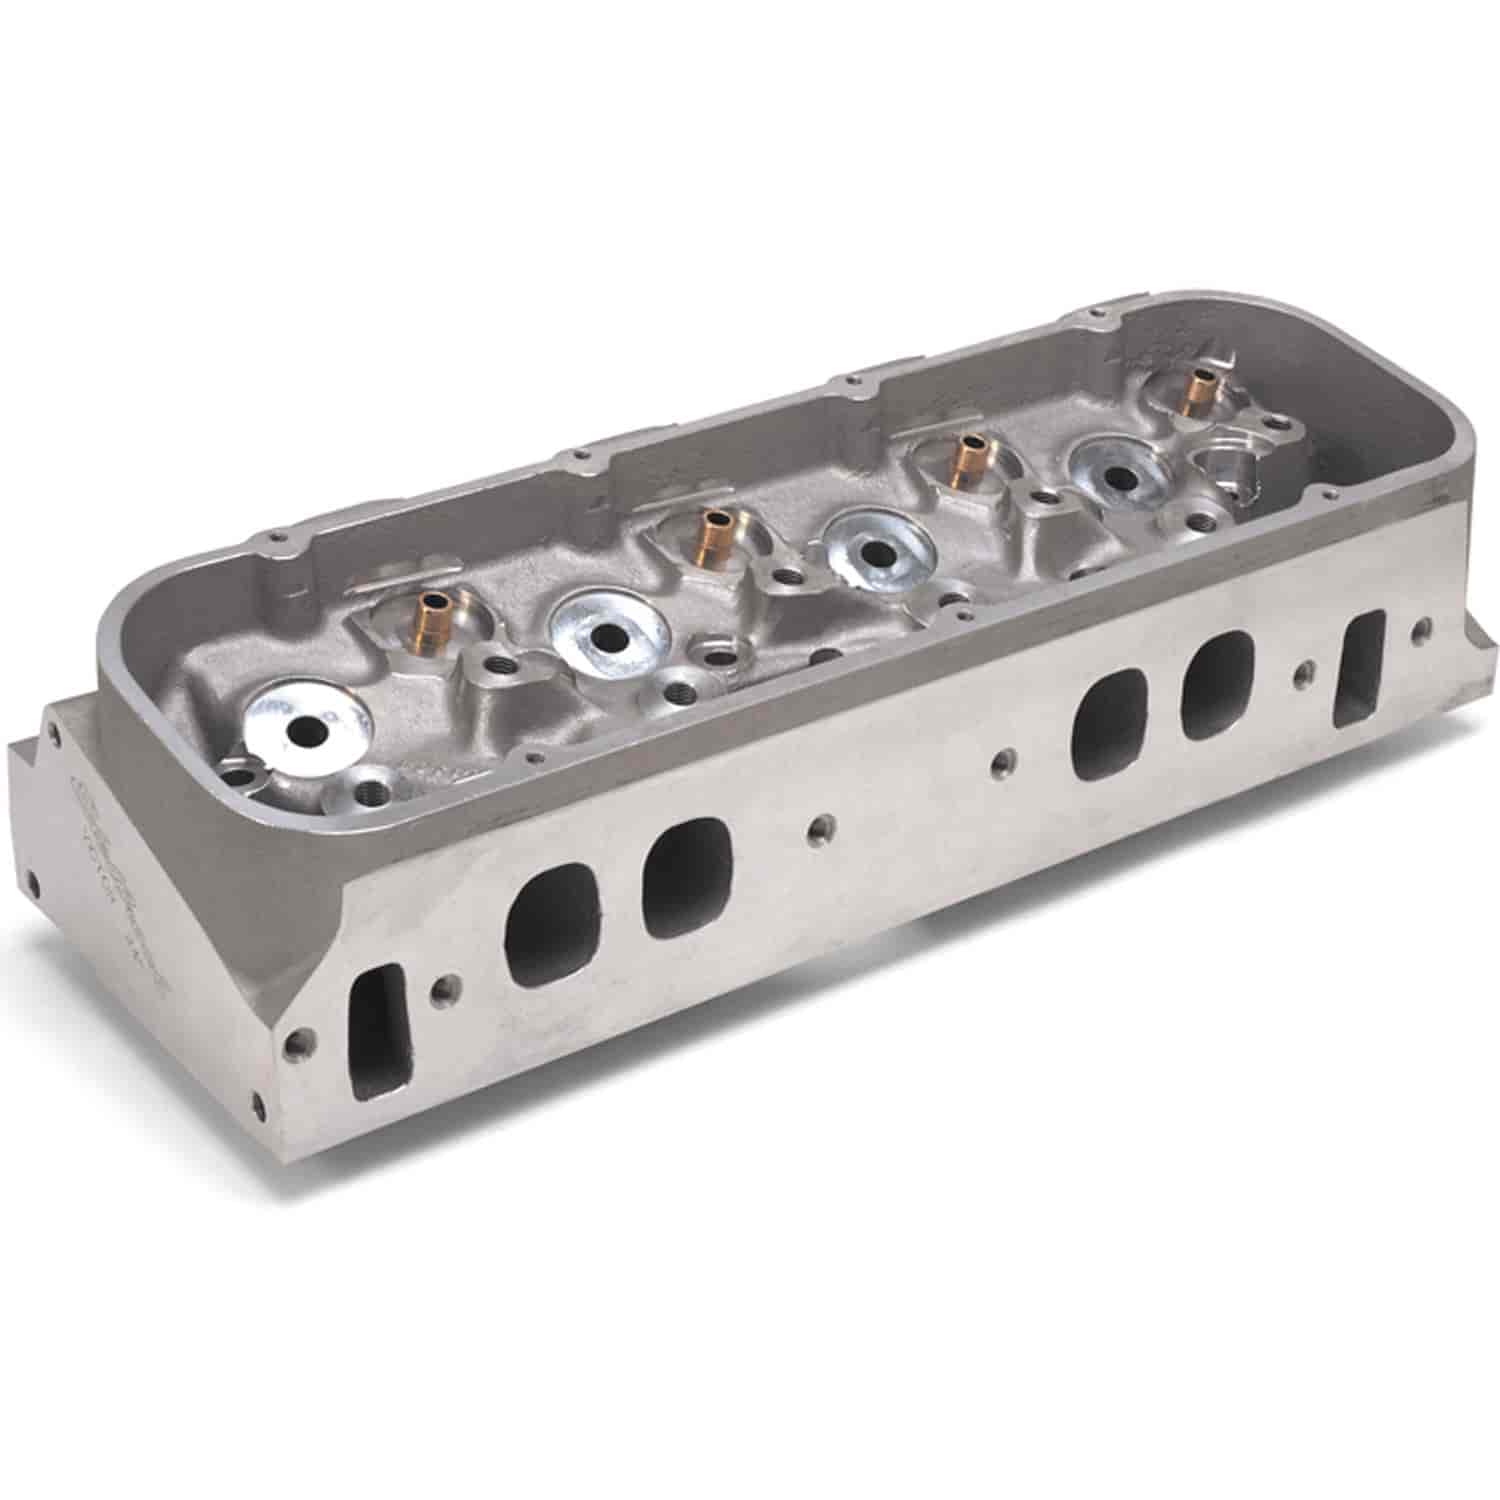 Pro-Port Raw Victor 24 Degree Cylinder Head for